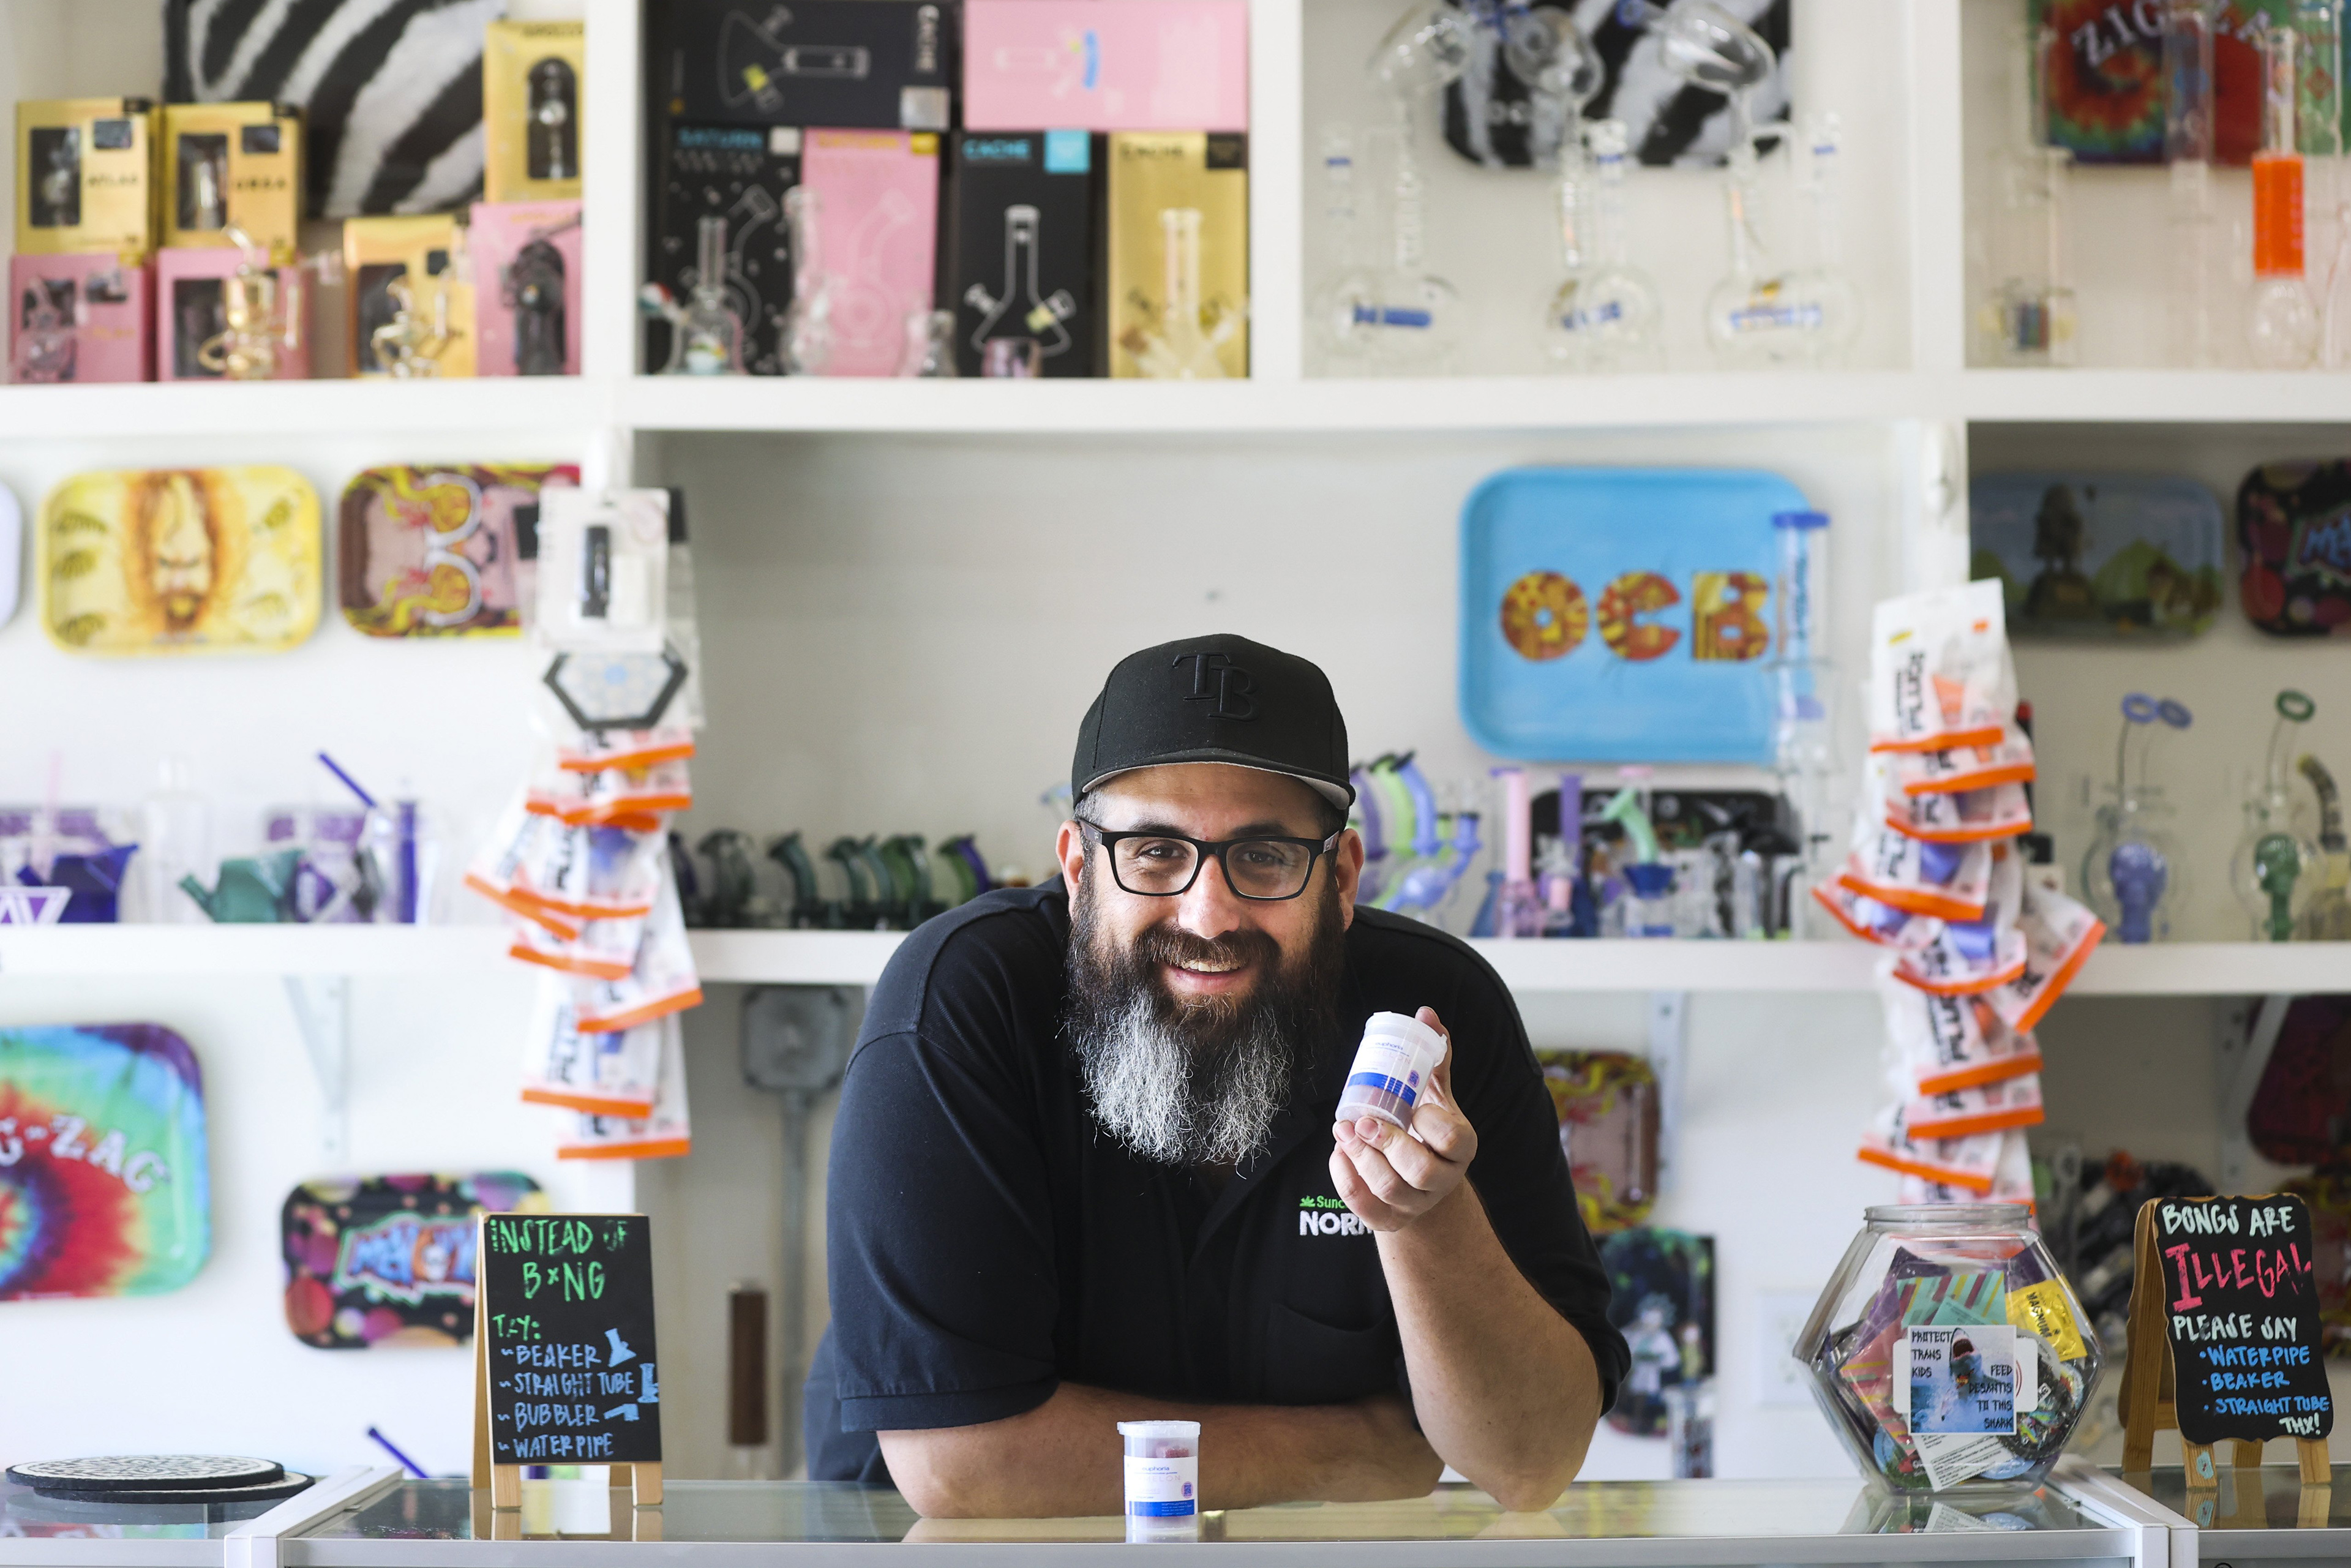 Carlos Hermida, an adult male who wears a baseball cap, black framed glasses, and a beard, smiles kindly as he looks directly at the camera. He is standing behind the counter at his store, and holds a container of Amanita muscaria mushroom gummies in his left hand.